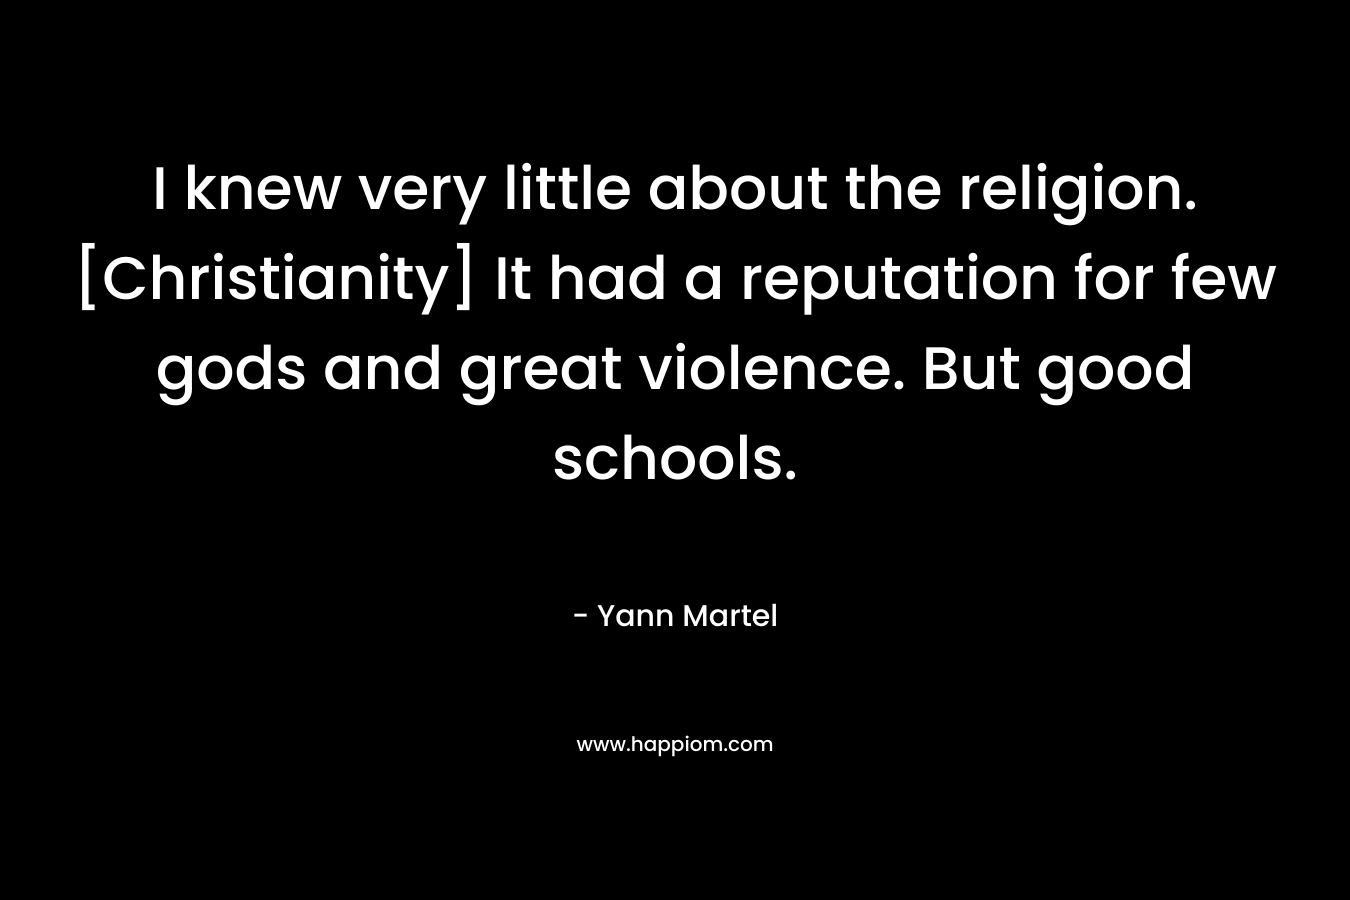 I knew very little about the religion. [Christianity] It had a reputation for few gods and great violence. But good schools.